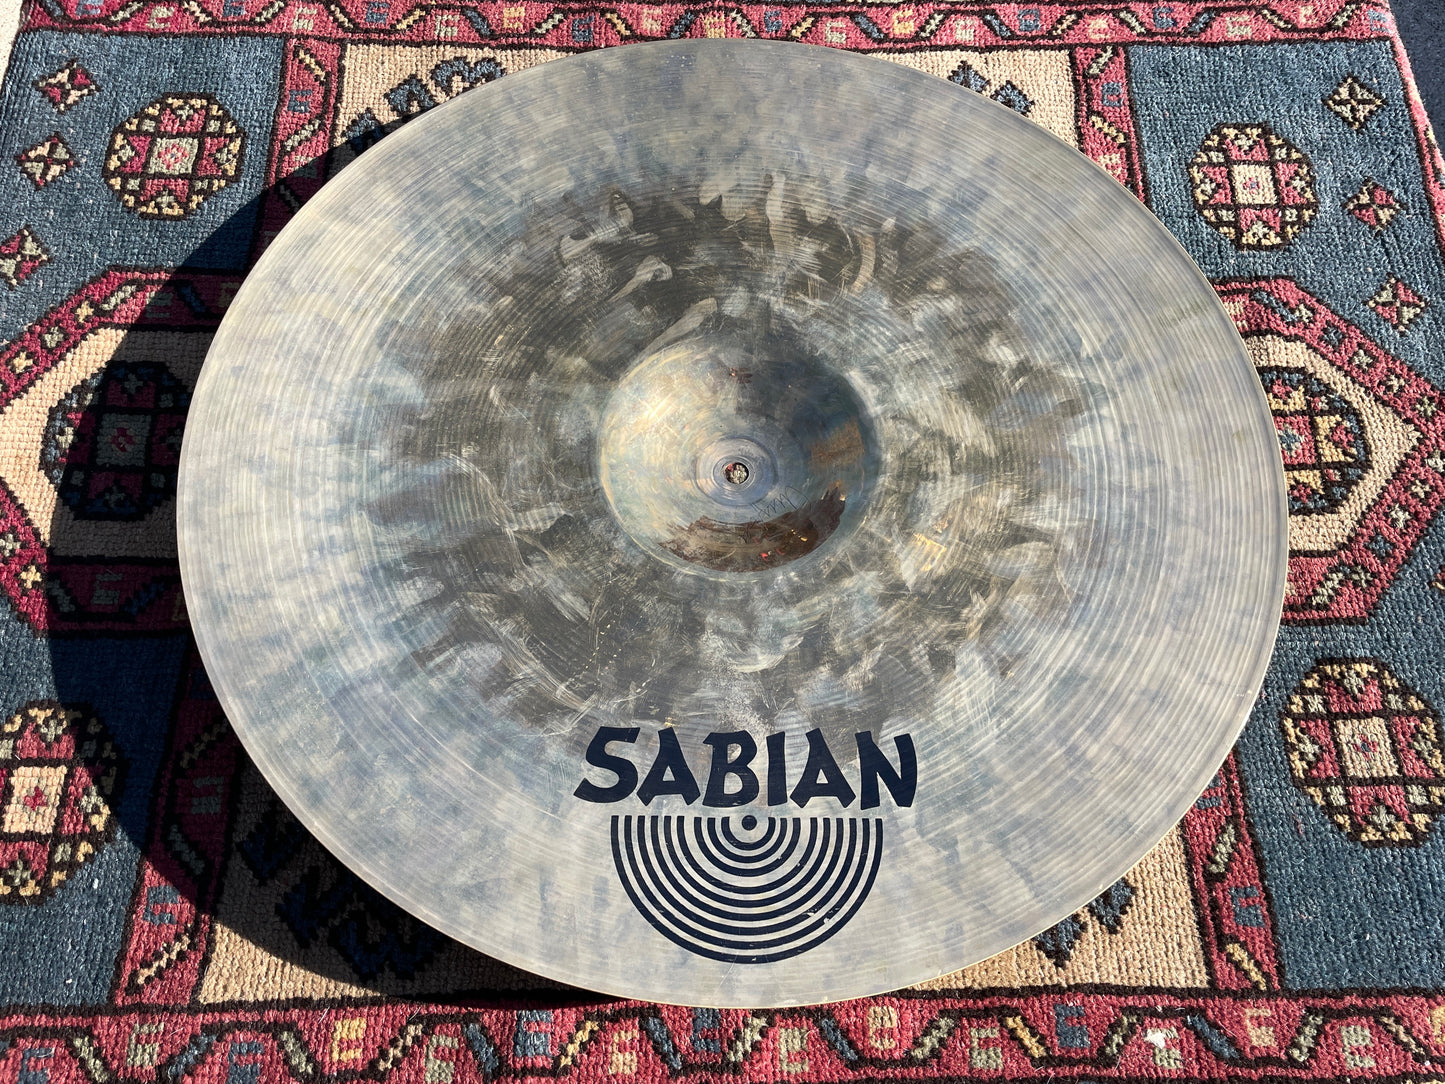 21" Sabian Hand Hammered HH Vintage Ride Cymbal 2220g Brilliant